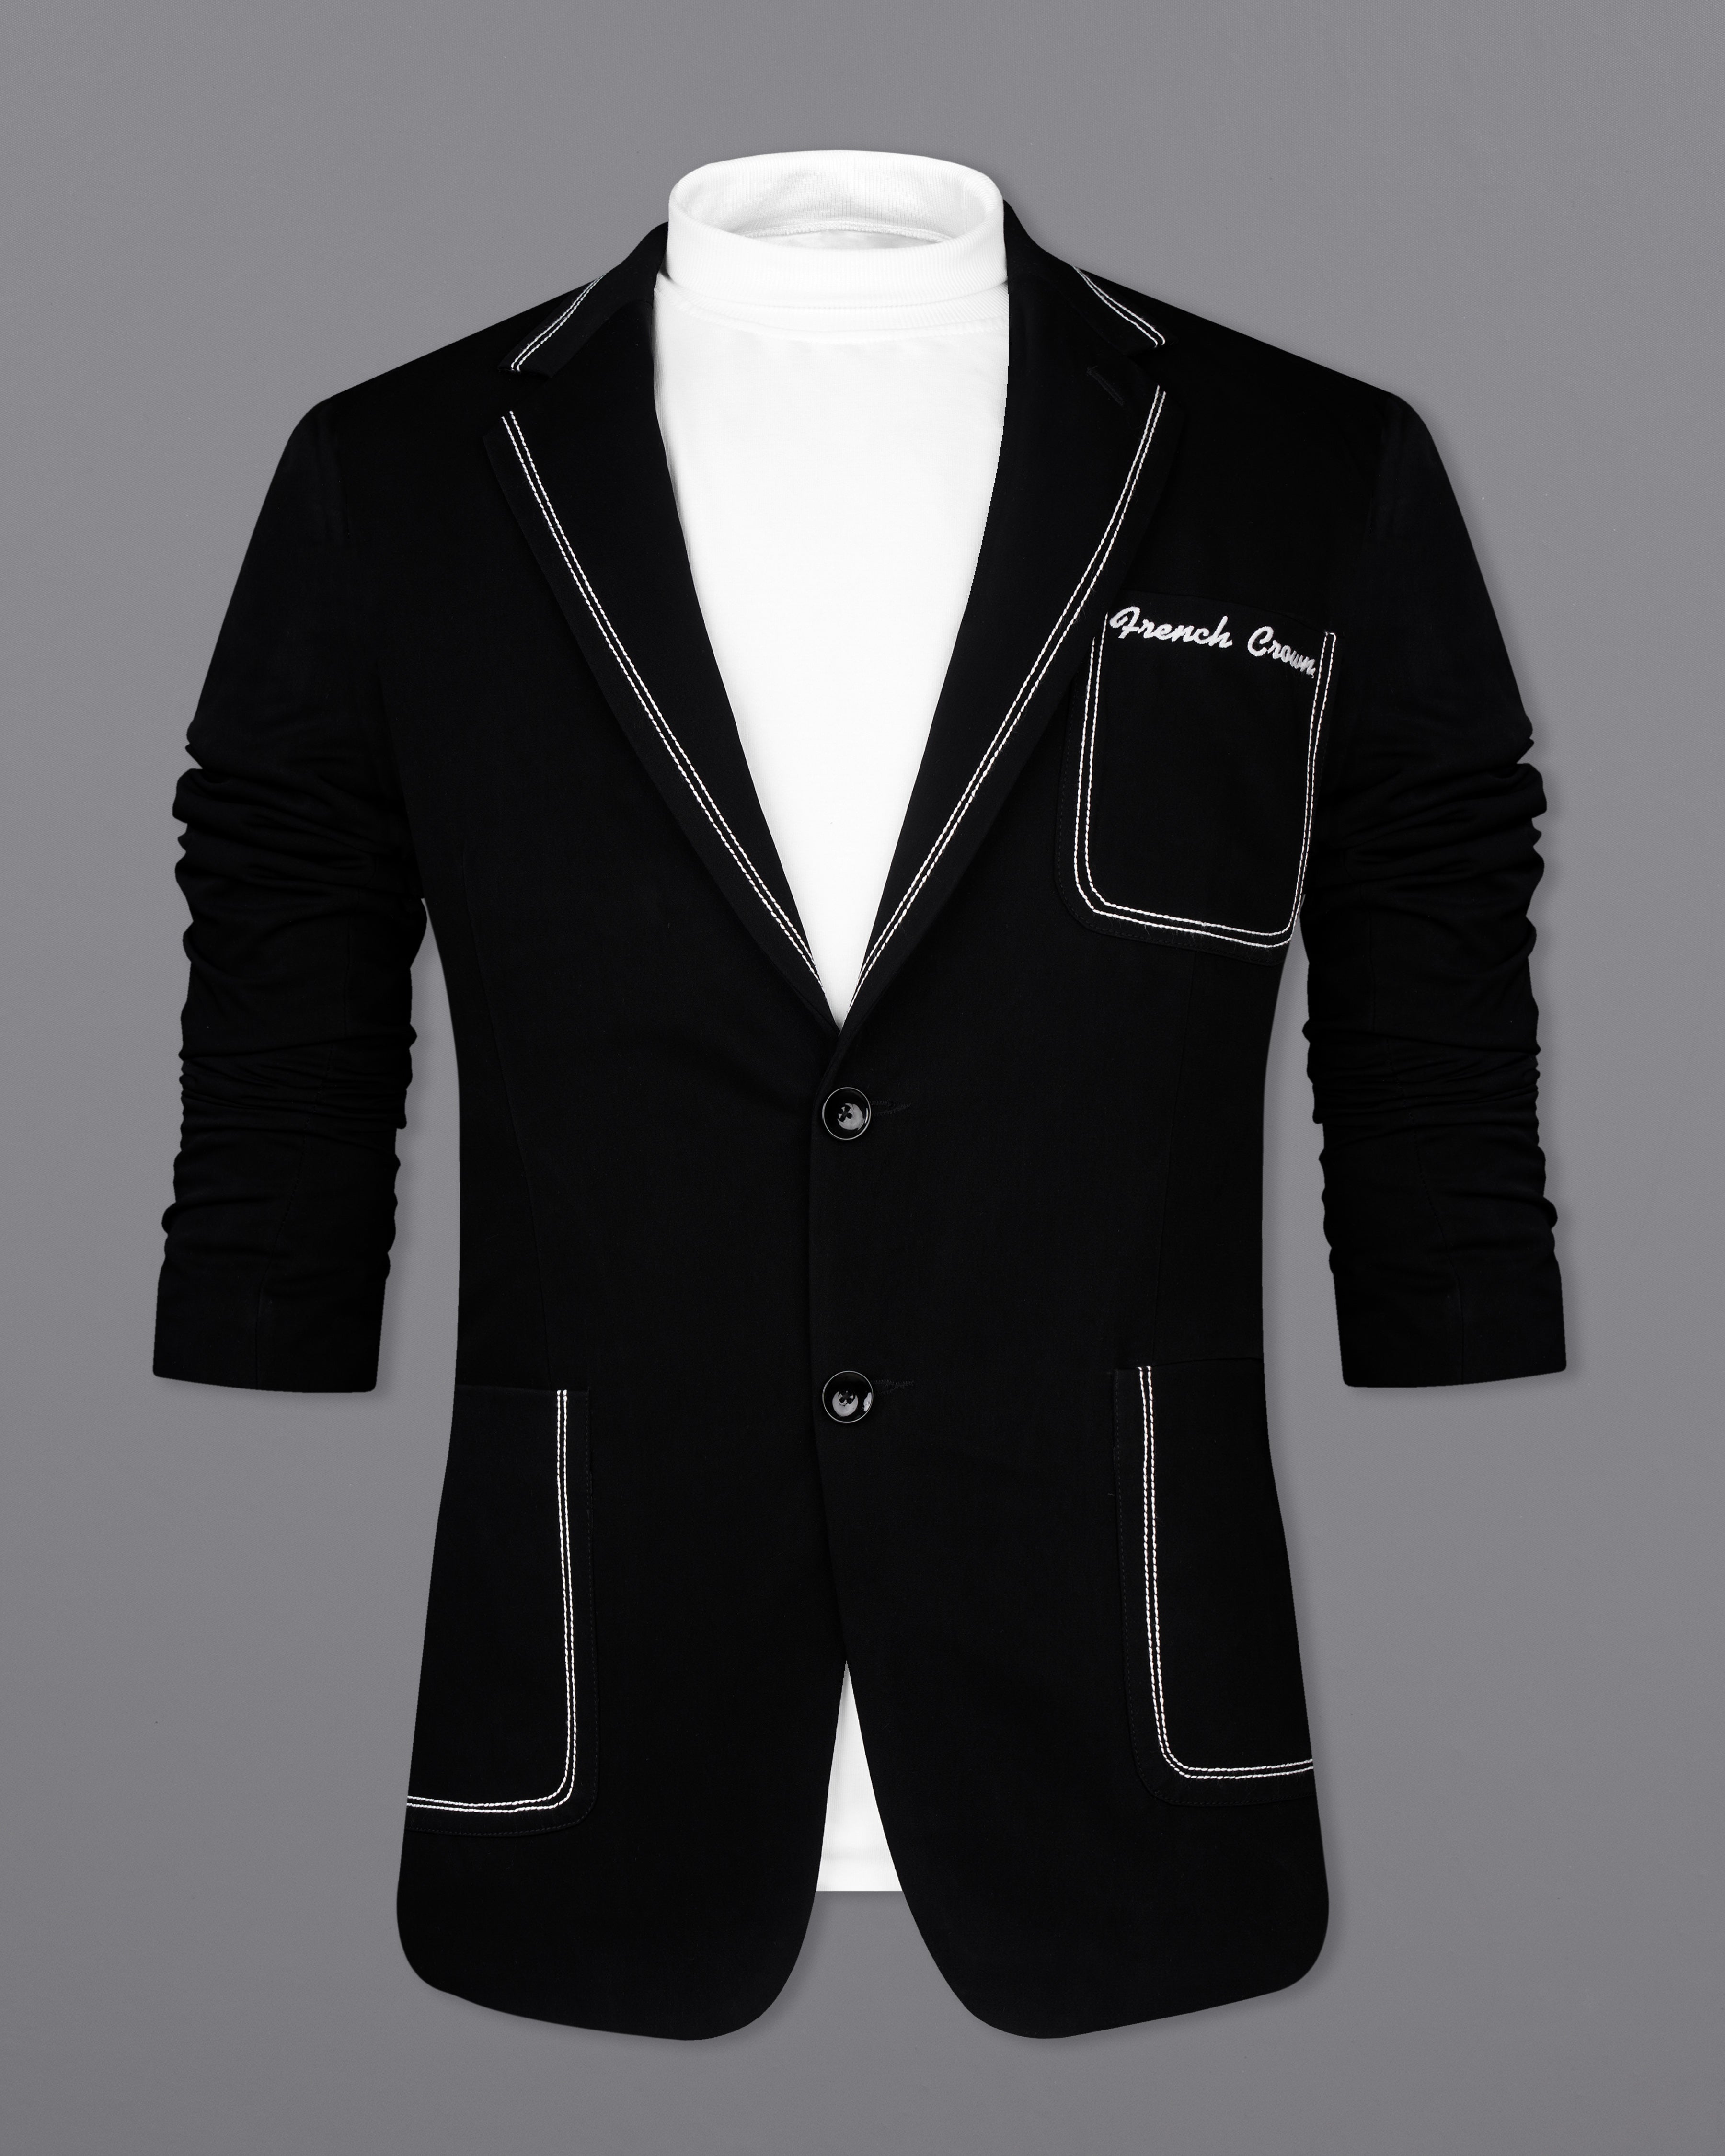 Korean  Black (The Best Black On This Planet) Embroidered Single Breasted Designer Signature Blazer BL2561-SB-PP-D244-36, BL2561-SB-PP-D244-38, BL2561-SB-PP-D244-40, BL2561-SB-PP-D244-42, BL2561-SB-PP-D244-44, BL2561-SB-PP-D244-46, BL2561-SB-PP-D244-48, BL2561-SB-PP-D244-50,, BL2561-SB-PP-D244-52, BL2561-SB-PP-D244-54, BL2561-SB-PP-D244-56, BL2561-SB-PP-D244-58, BL2561-SB-PP-D244-60